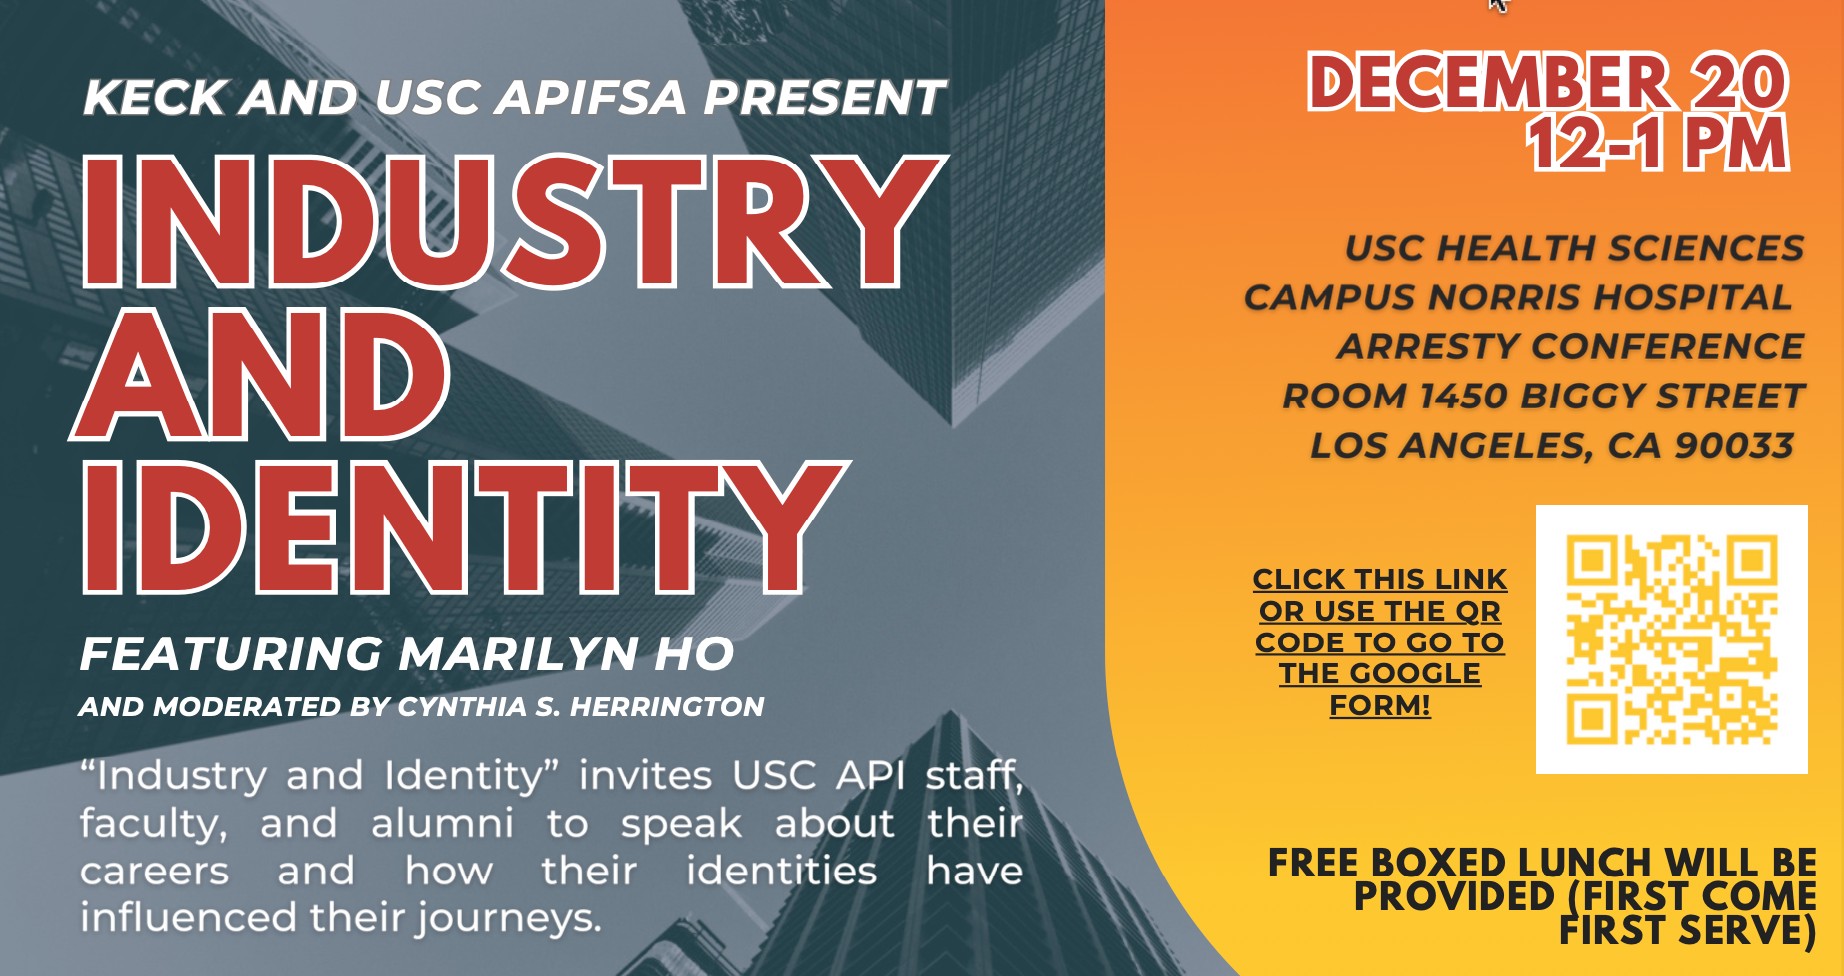 Industry and Identity” with Marilyn Ho - Events Calendar